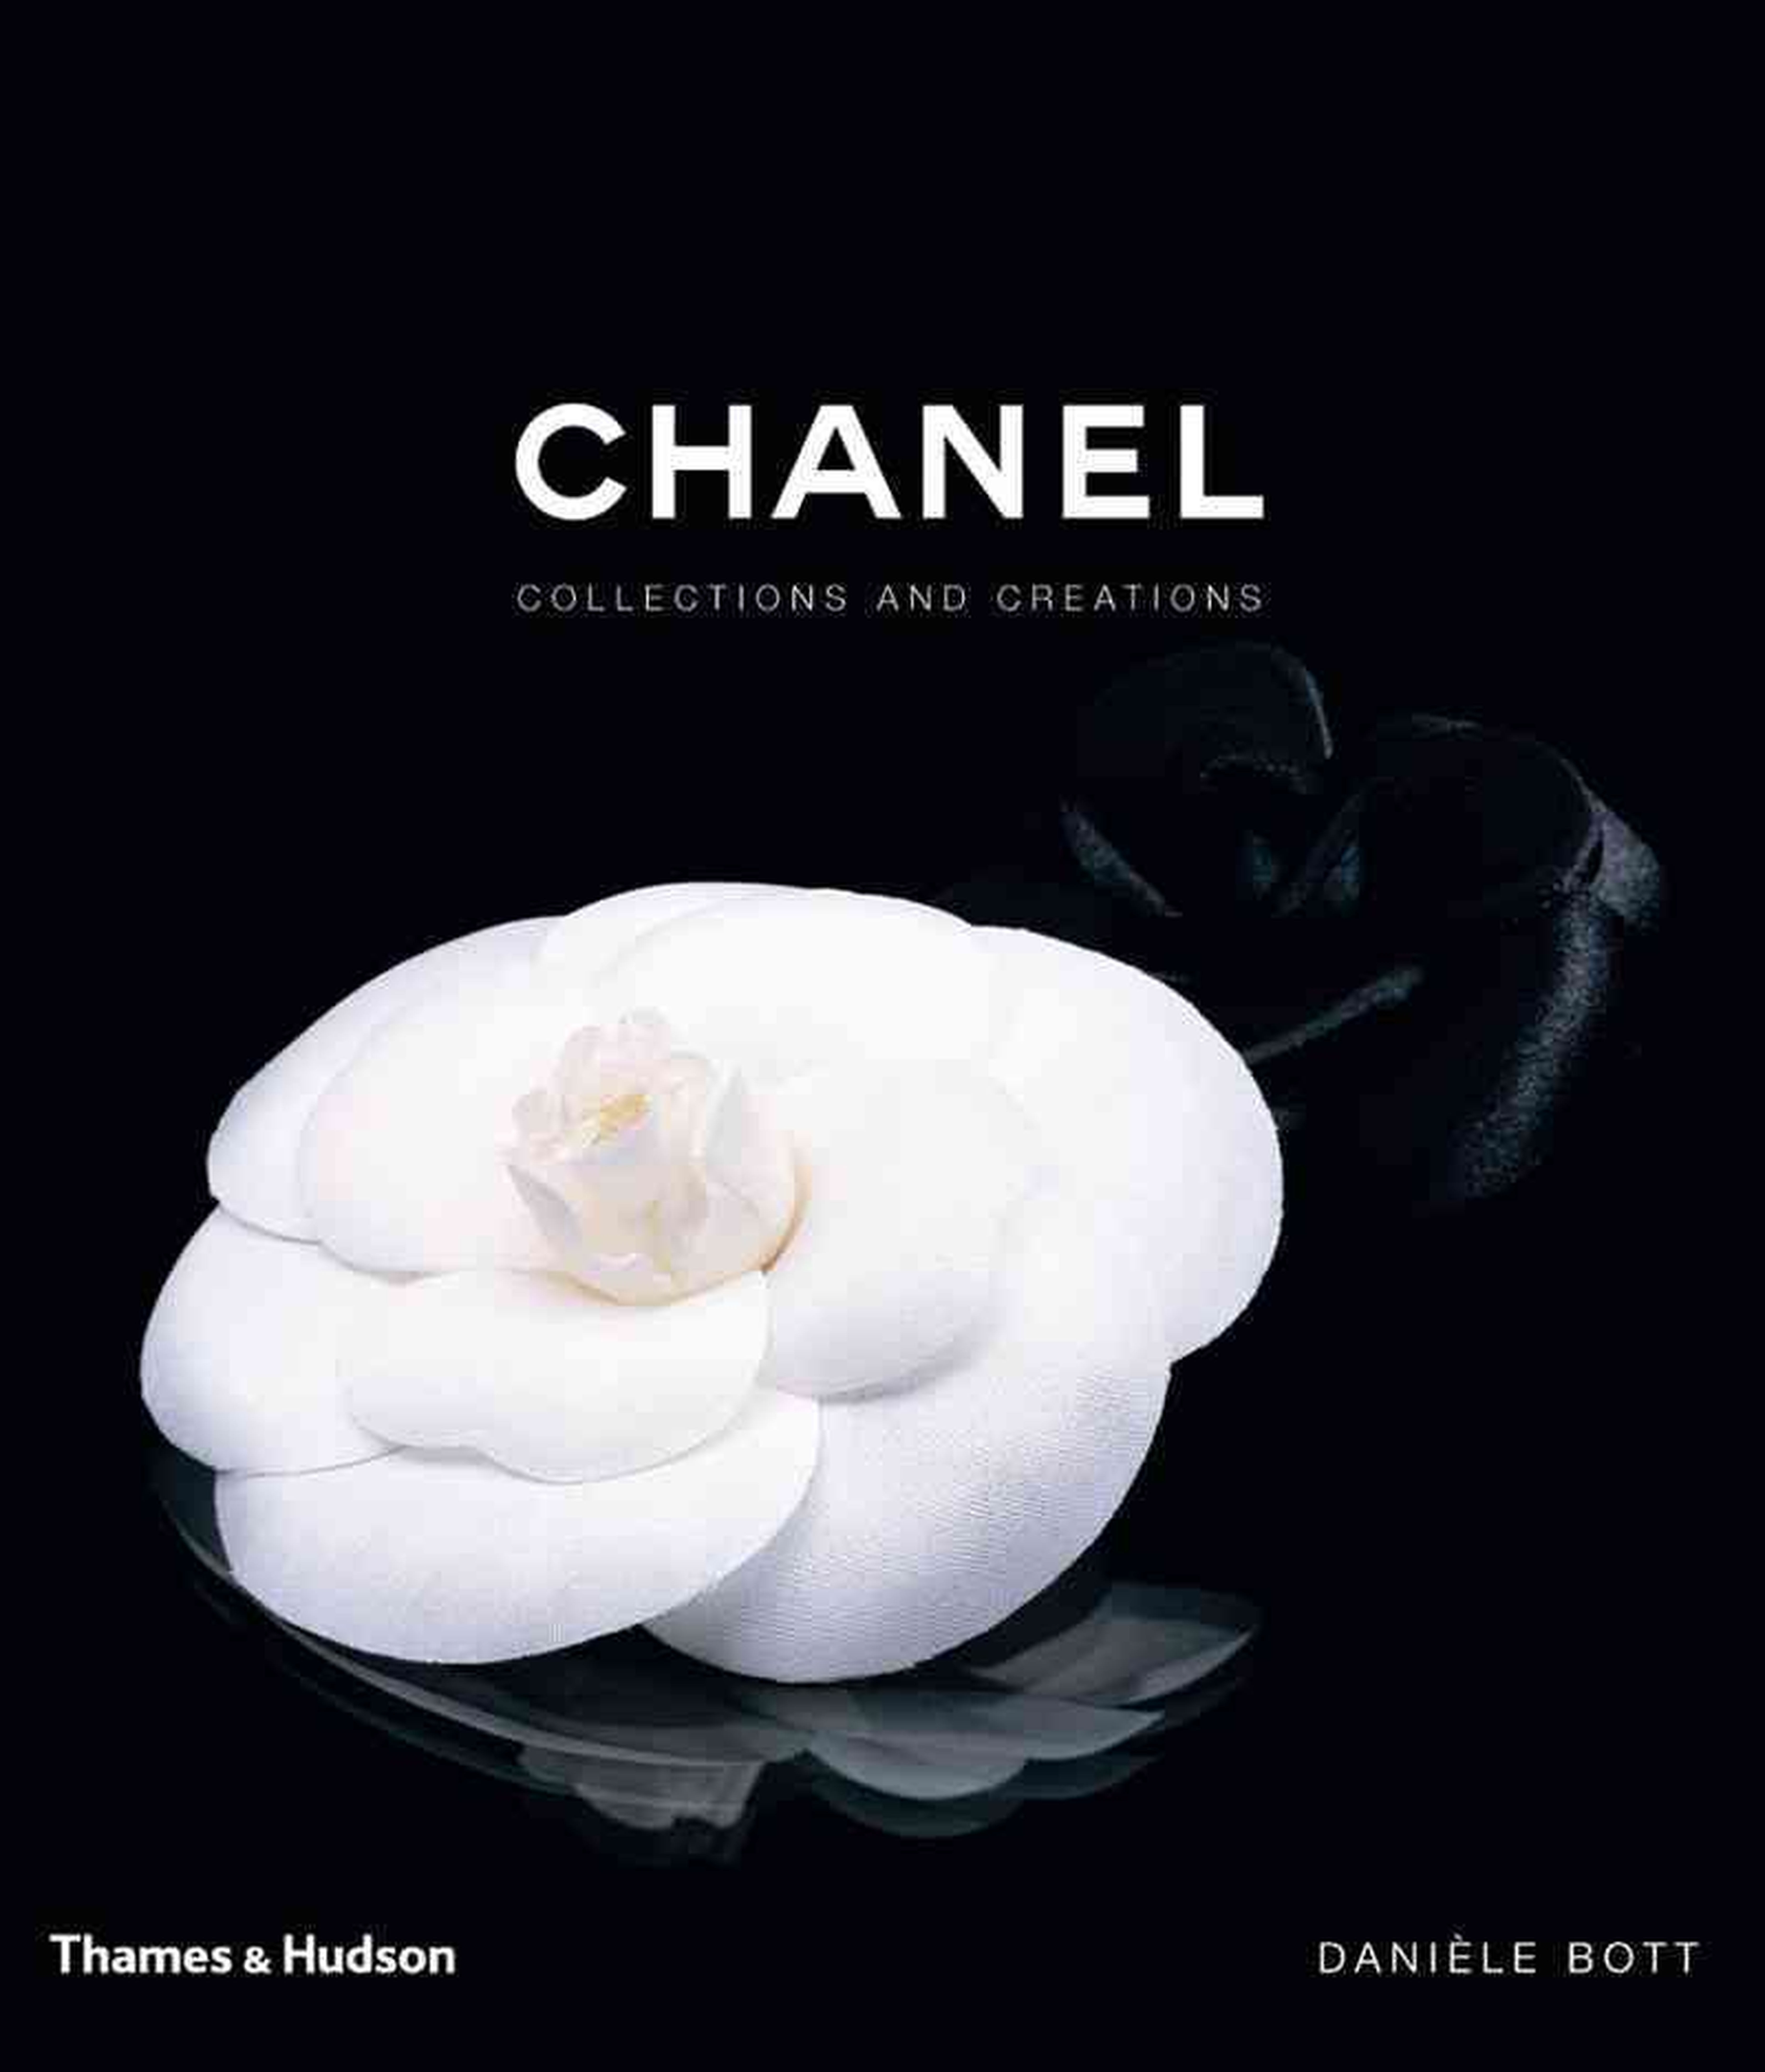 Chanel: Collections and Creations (Hardcover) - Overstock